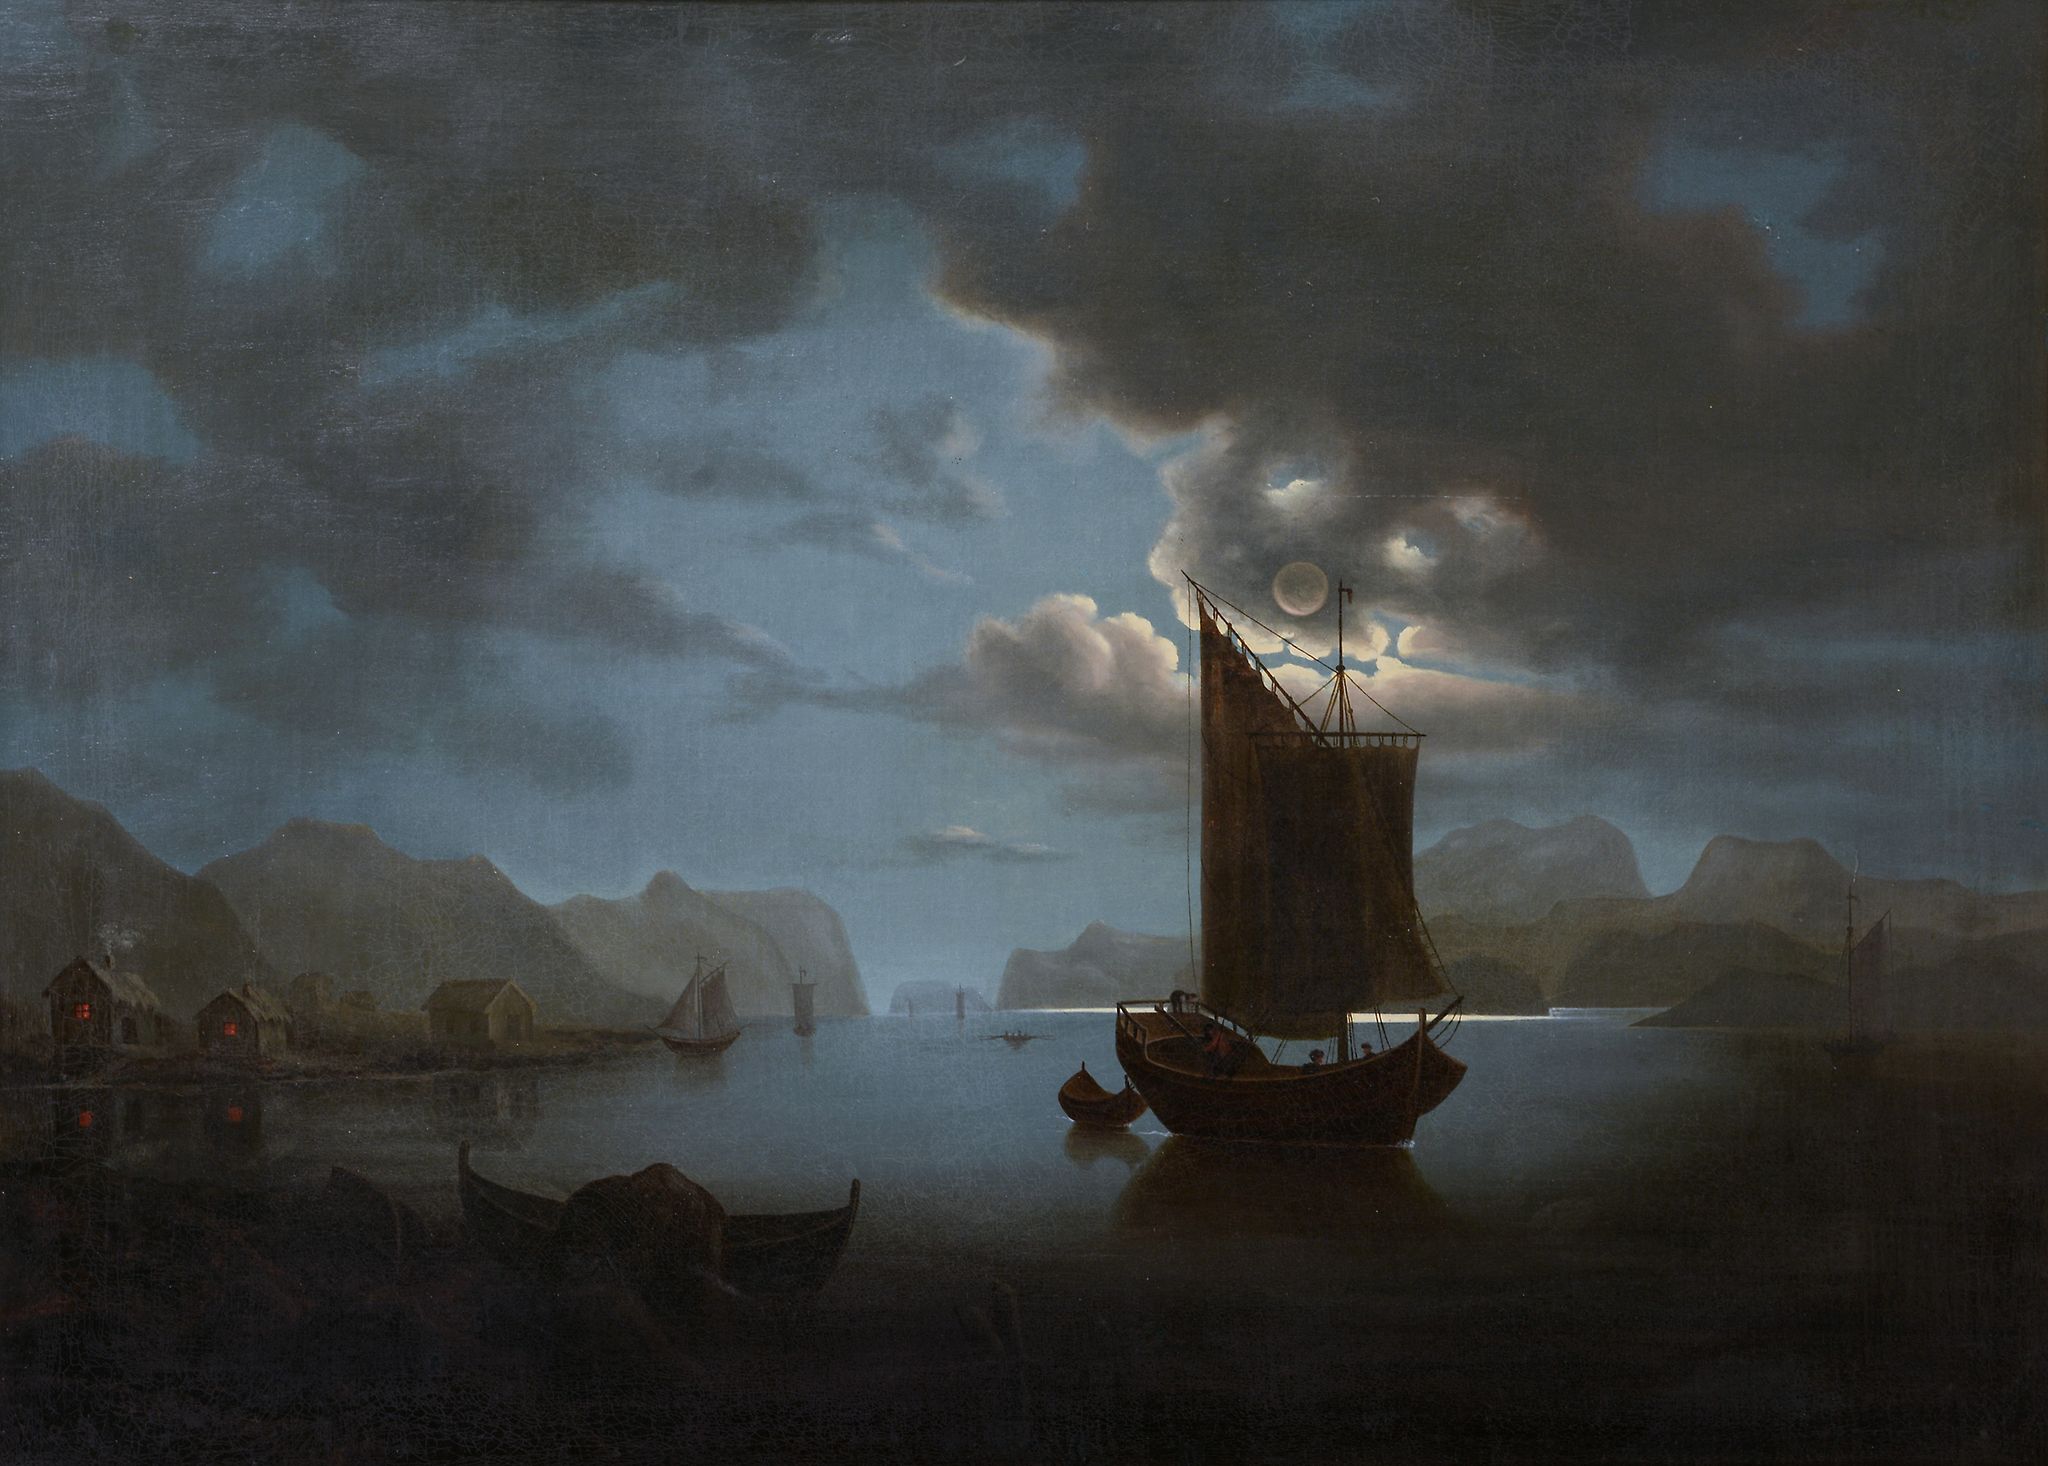 English School (19th century) - Vessels in a fjord by moonlight Oil on canvas 67 x 92 cm (26 1/2 x